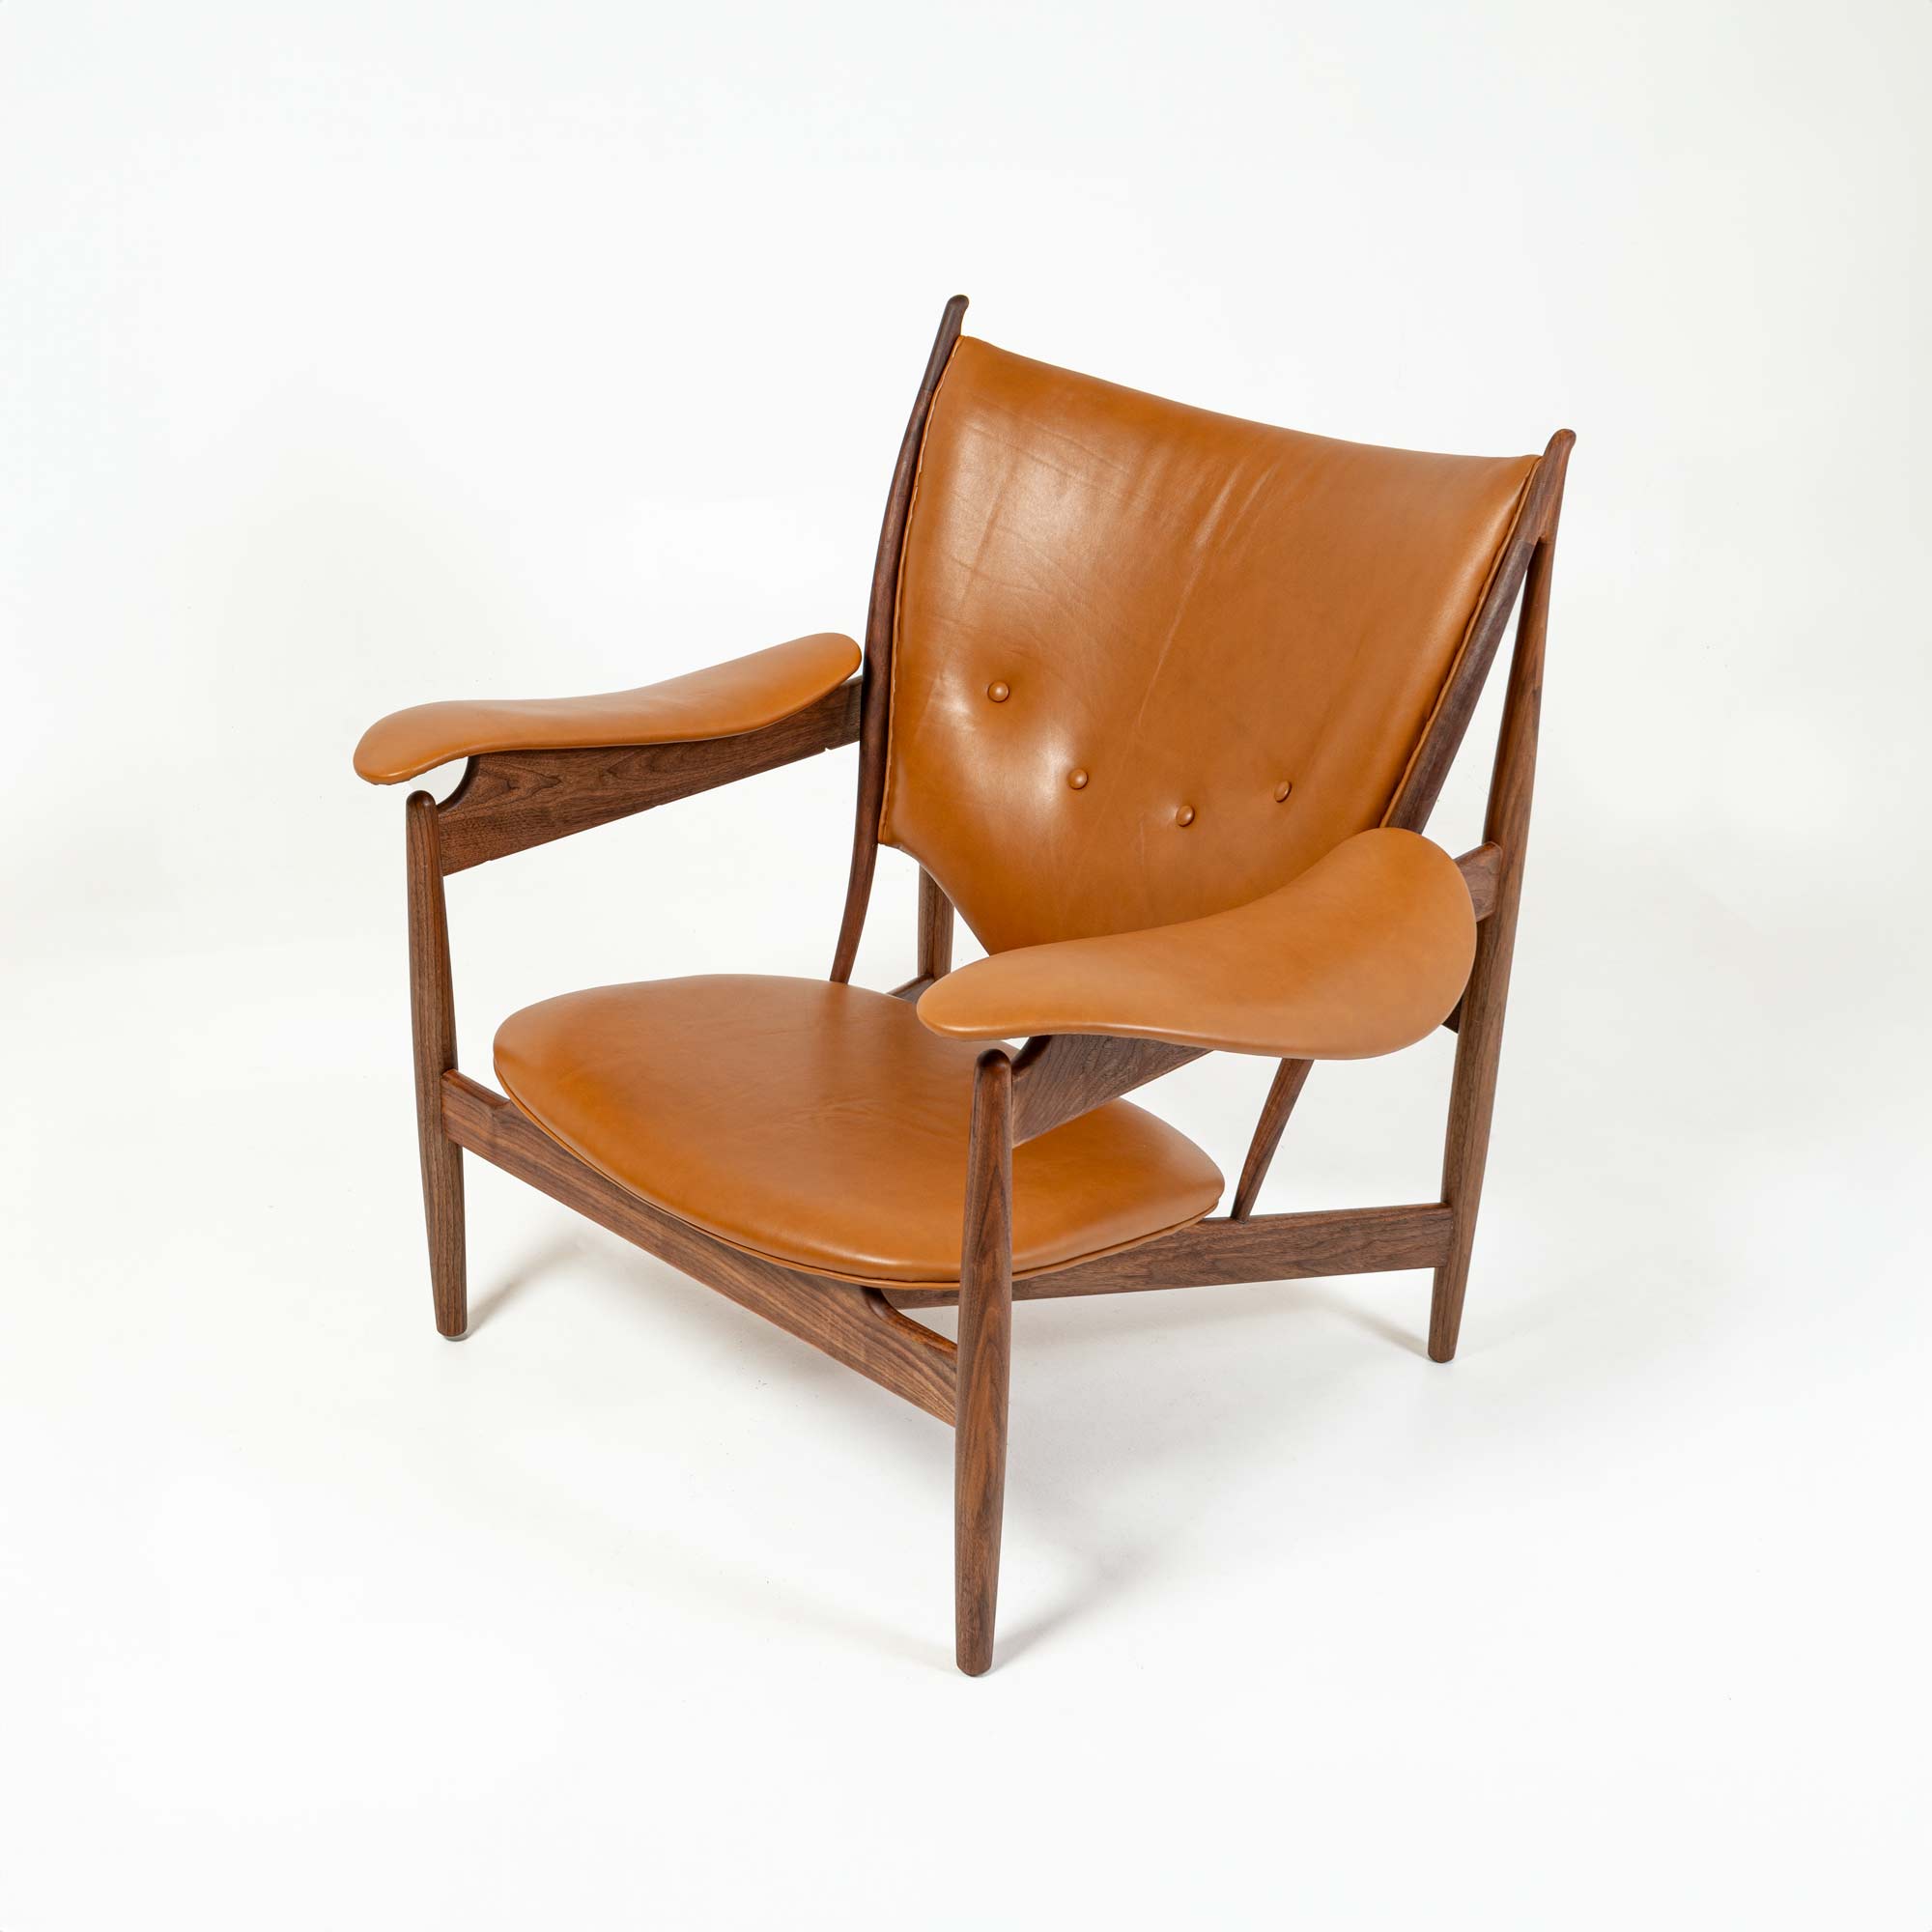 Chieftain Chair by Finn Juhl for Baker Furniture 1998 edition